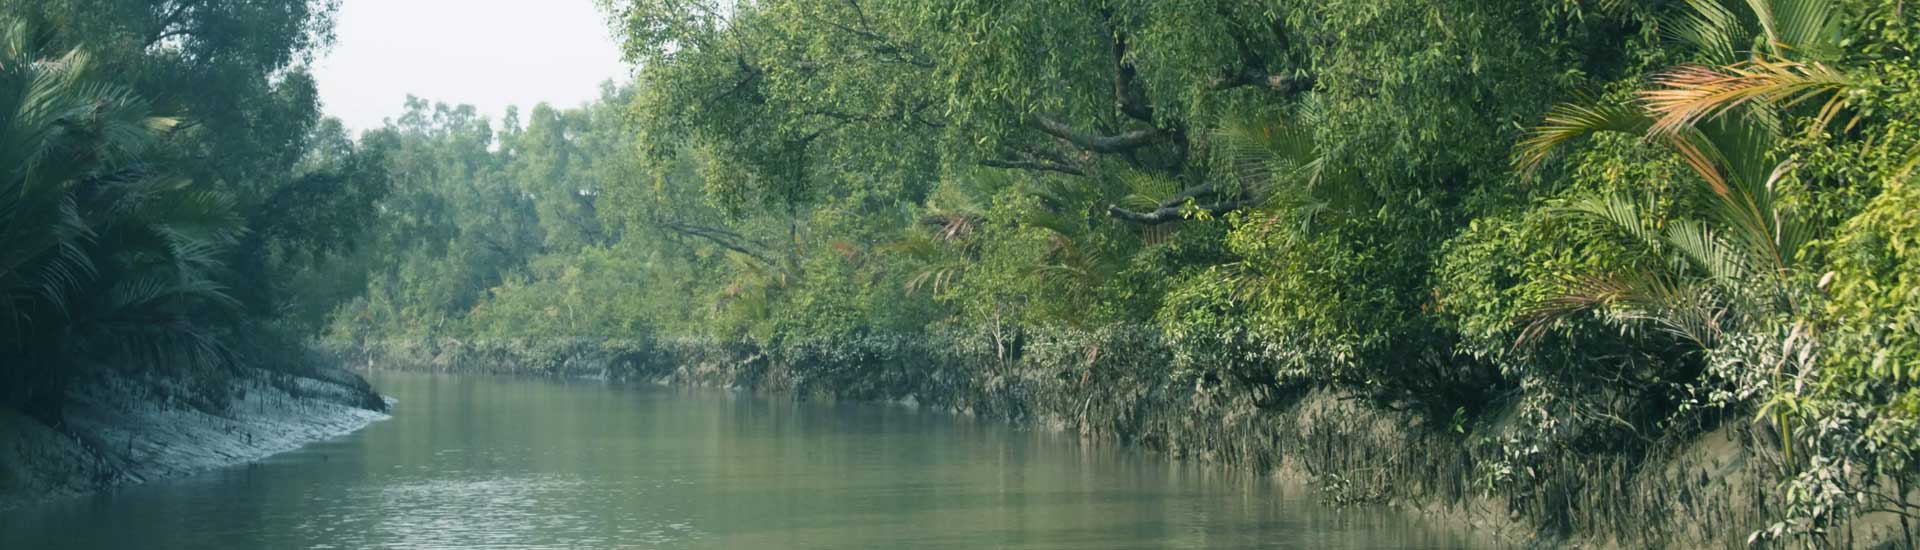 Three Most Important Things to Do in Sundarbans